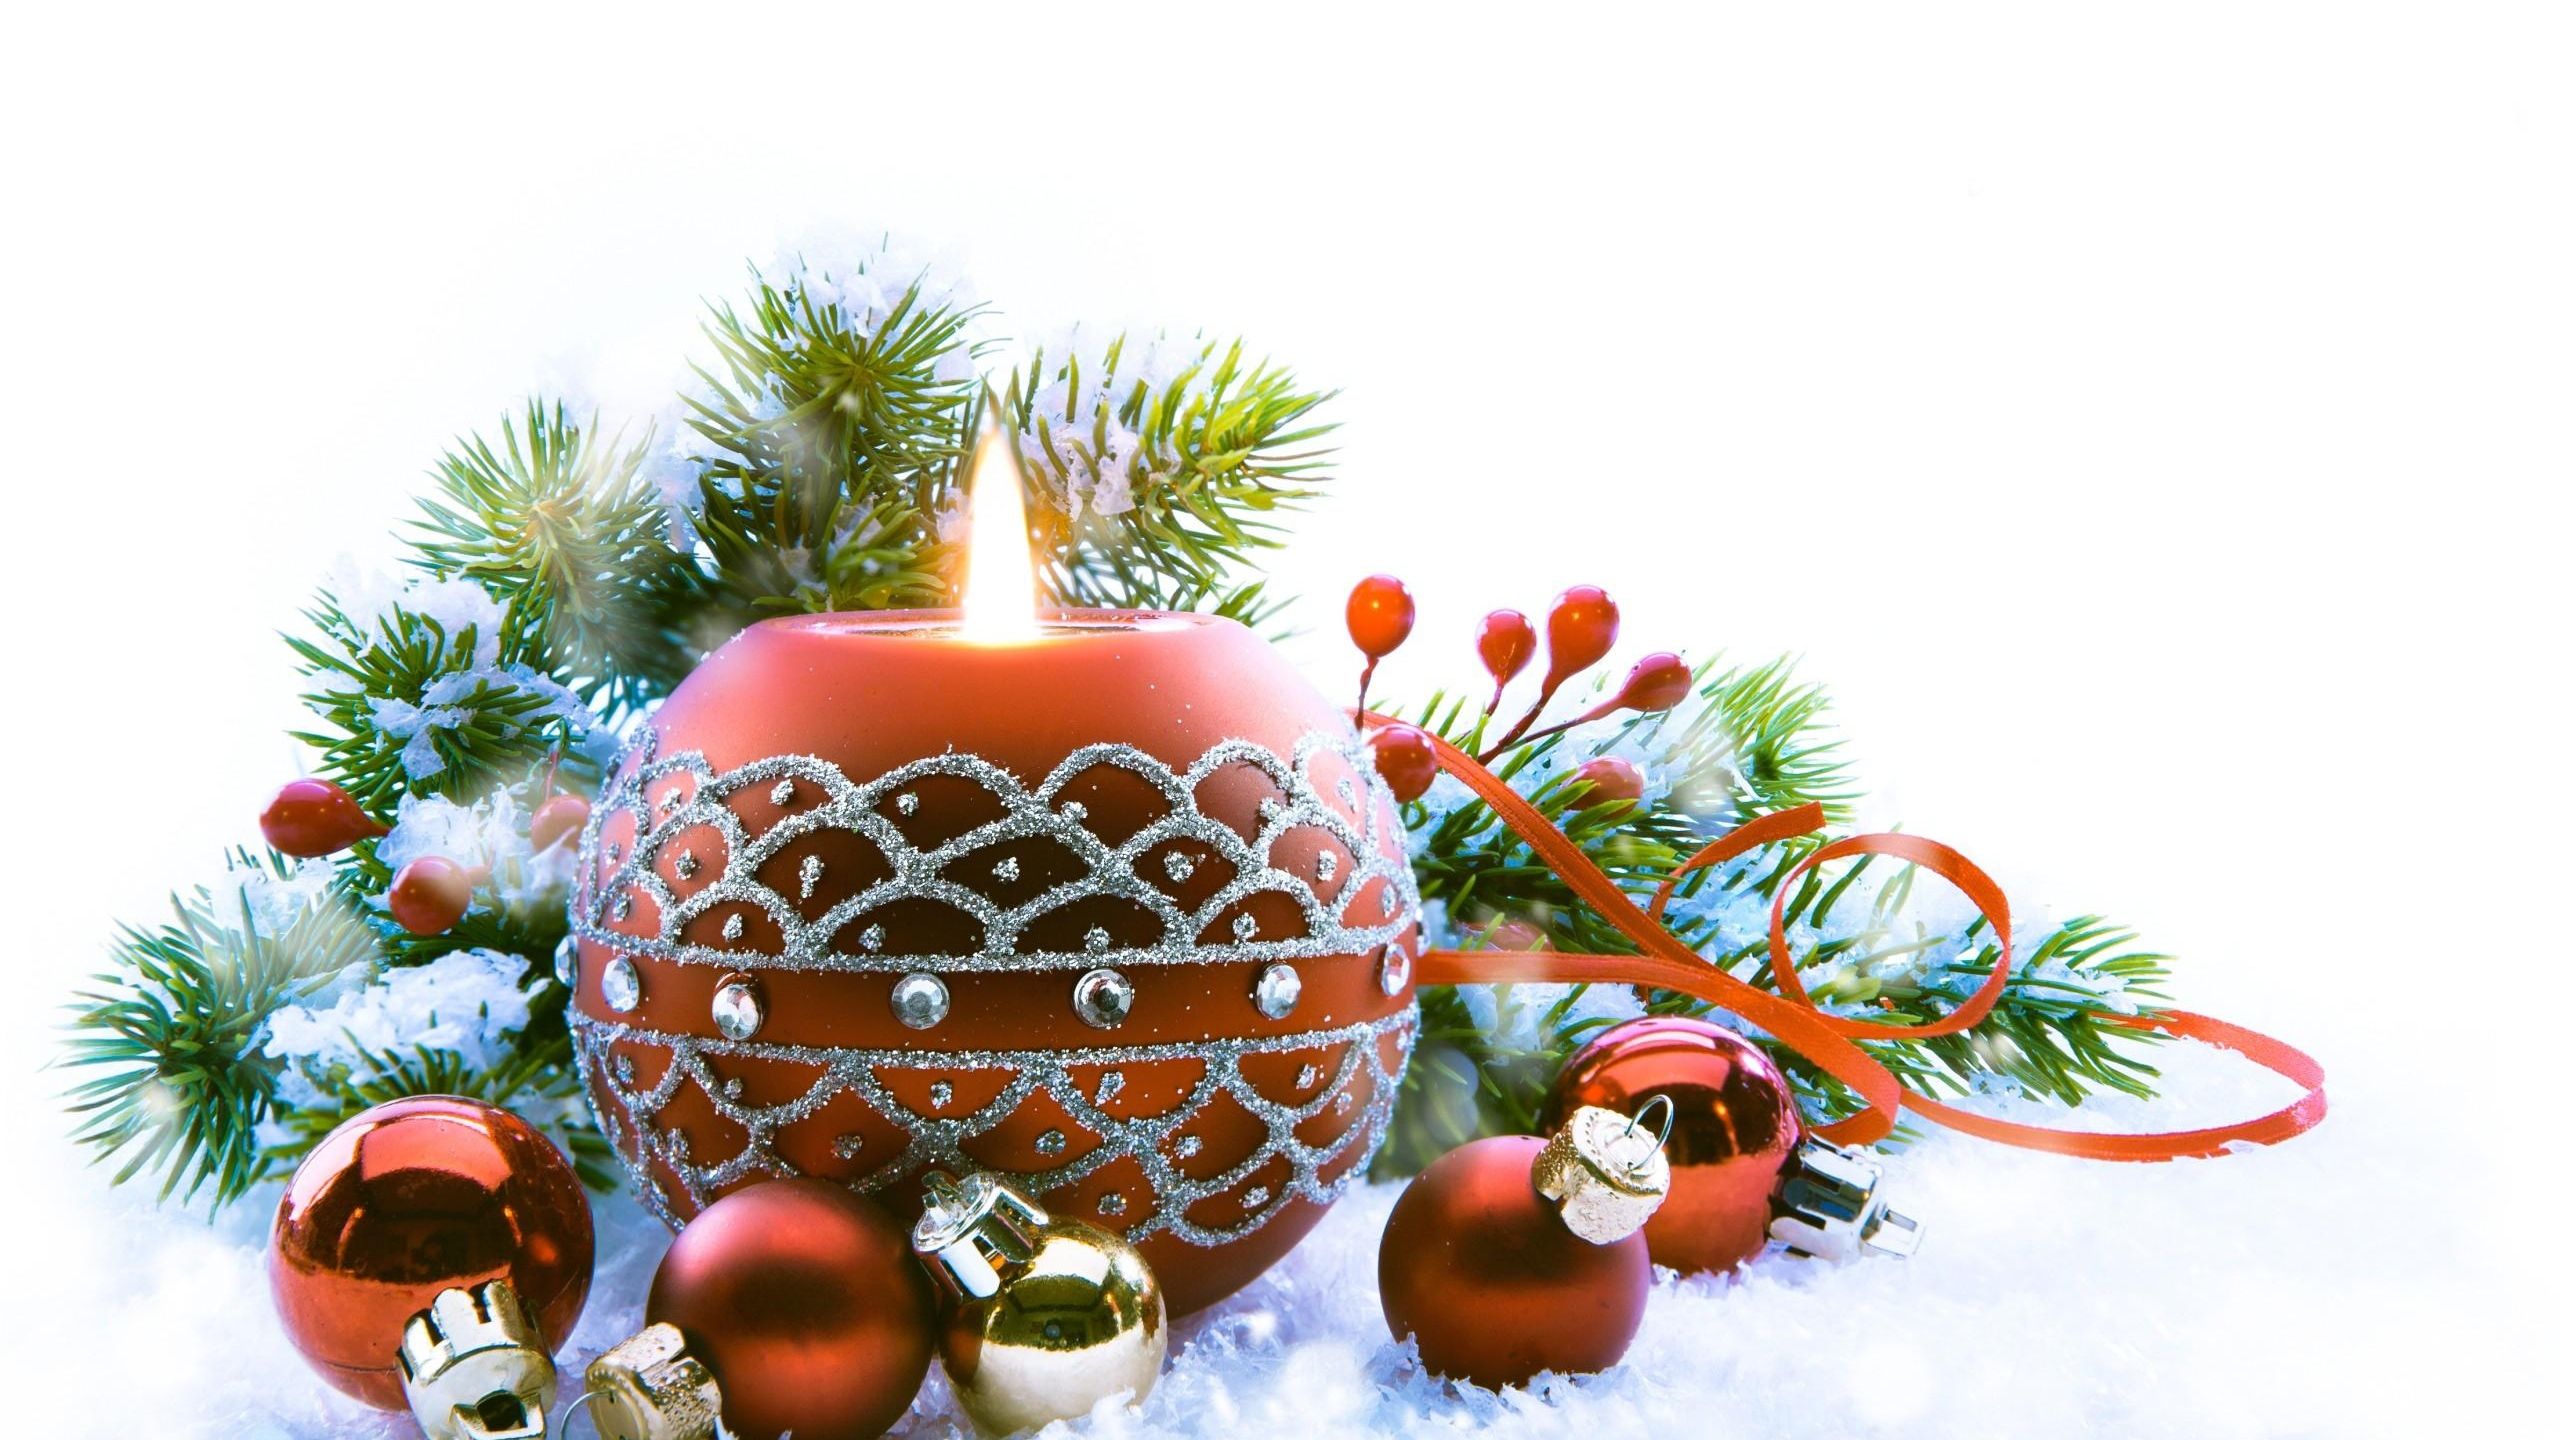 Winter Christmas Candles Decorations Holiday New Year wallpaperx1440